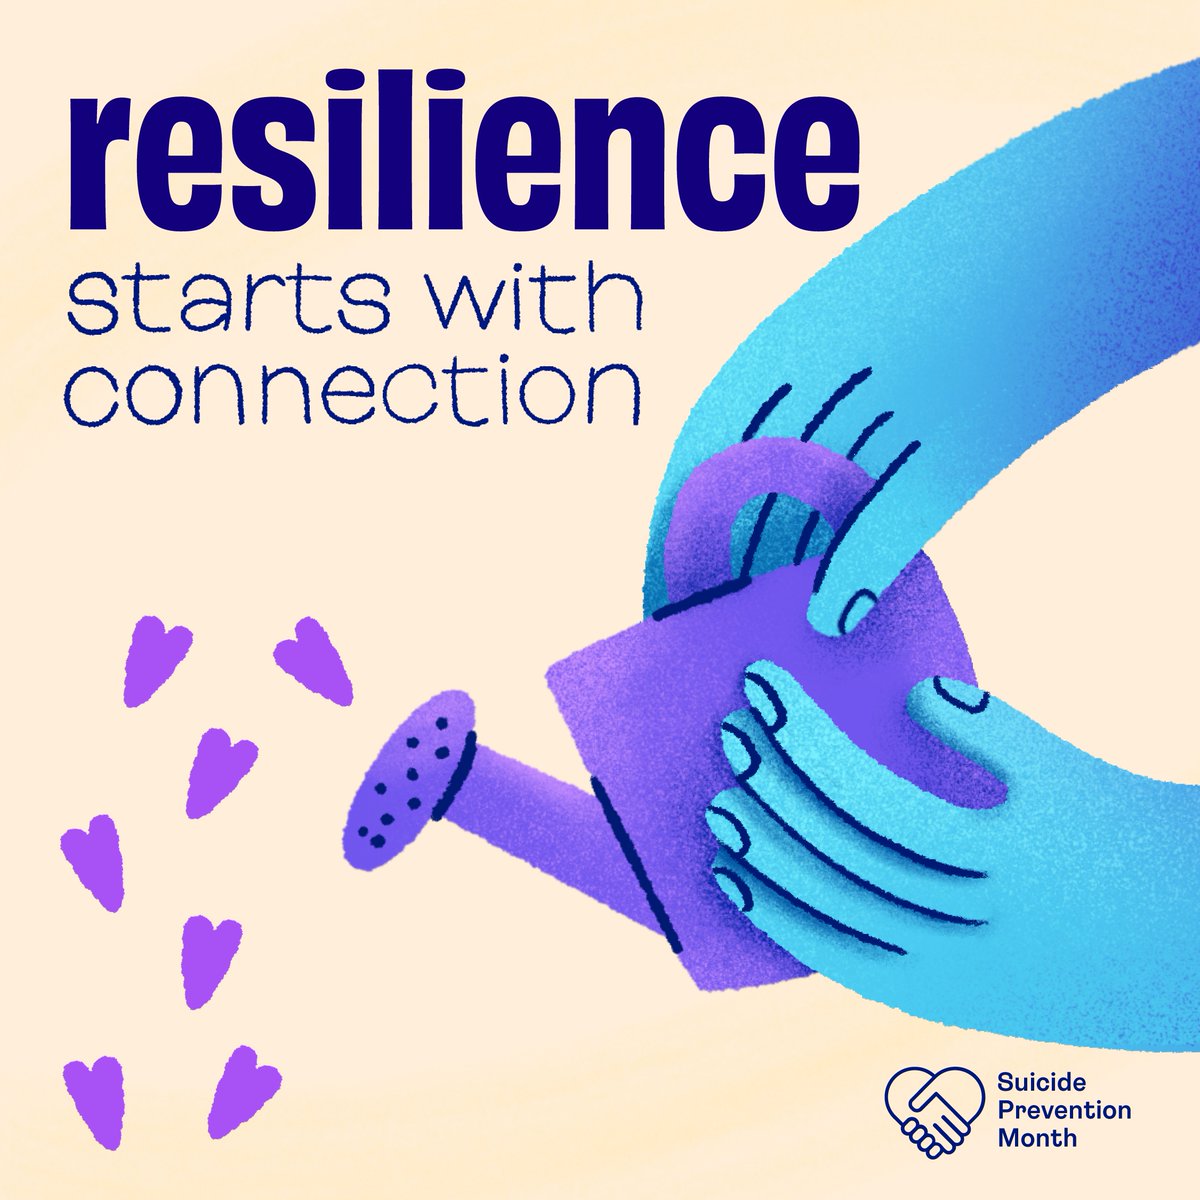 We can make ourselves, our loved ones, and our communities more resilient and protected against #suicide by learning healthy ways to cope with stress: bit.ly/3cRrK97 #BeThe1To #BeThere #SPM23